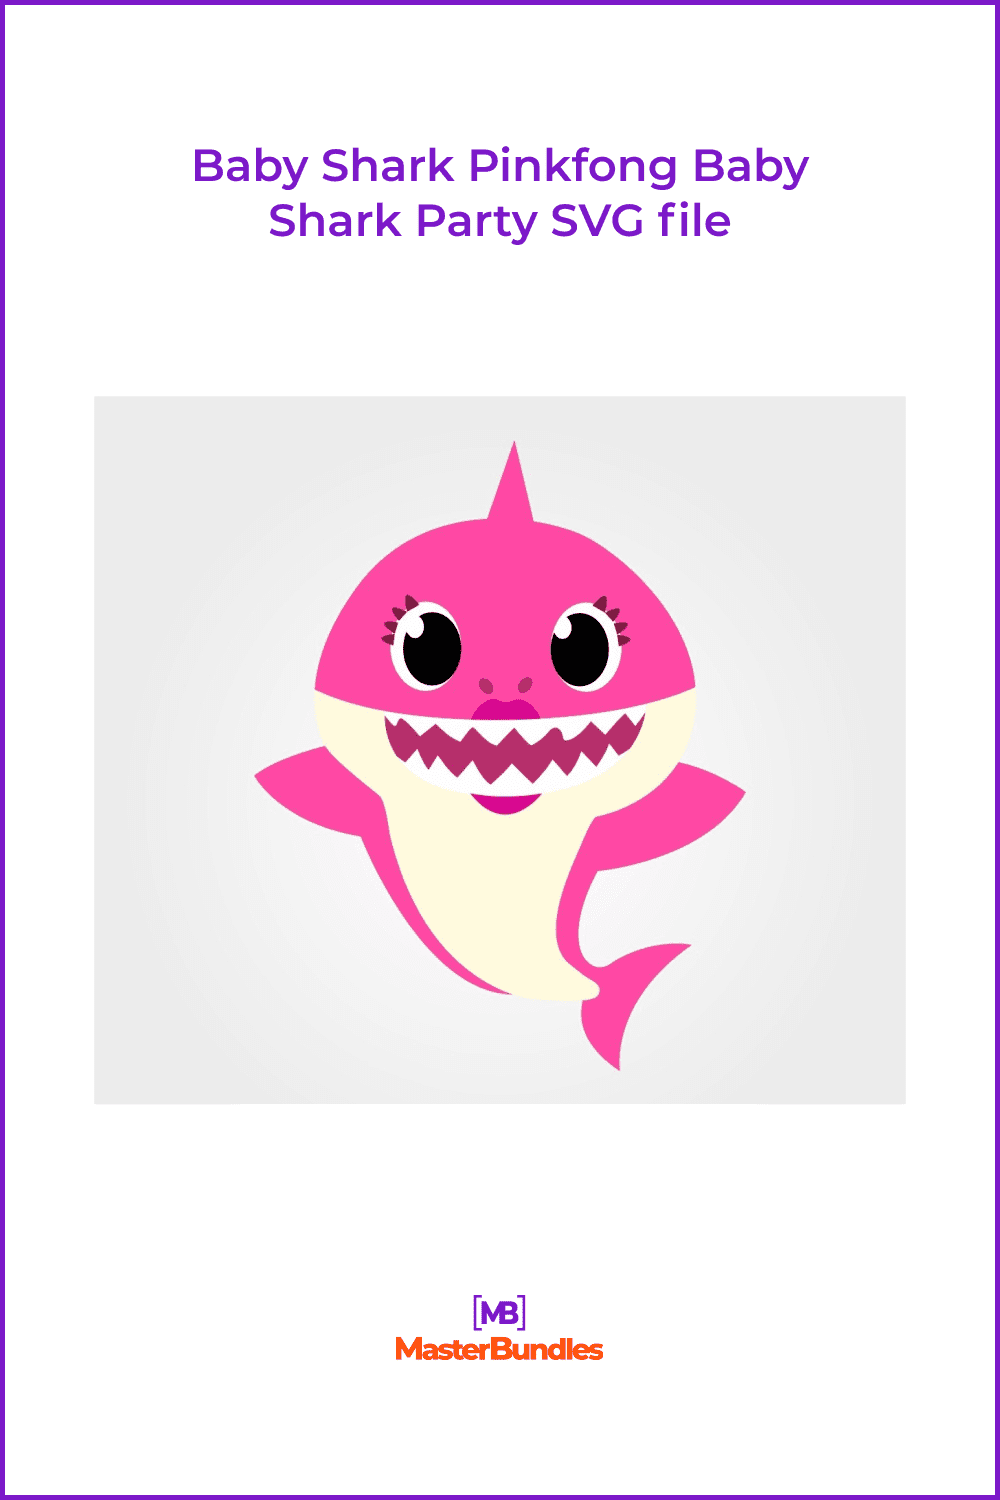 Baby Shark Pinkfong Baby Shark Party SVG file.